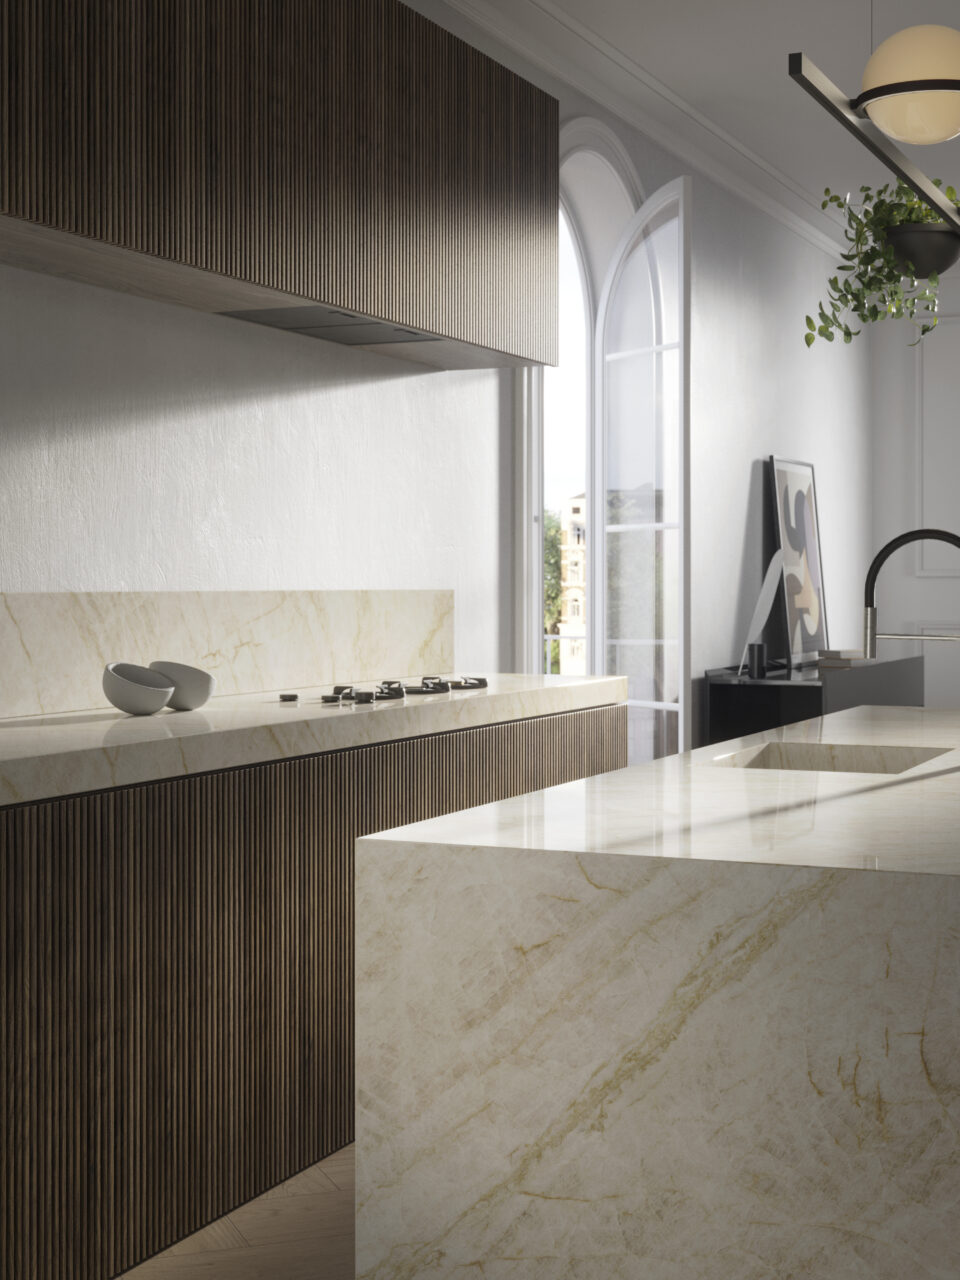 Kitchen with Porcelanosa XTONE worktops and upstands in Taj Mahal